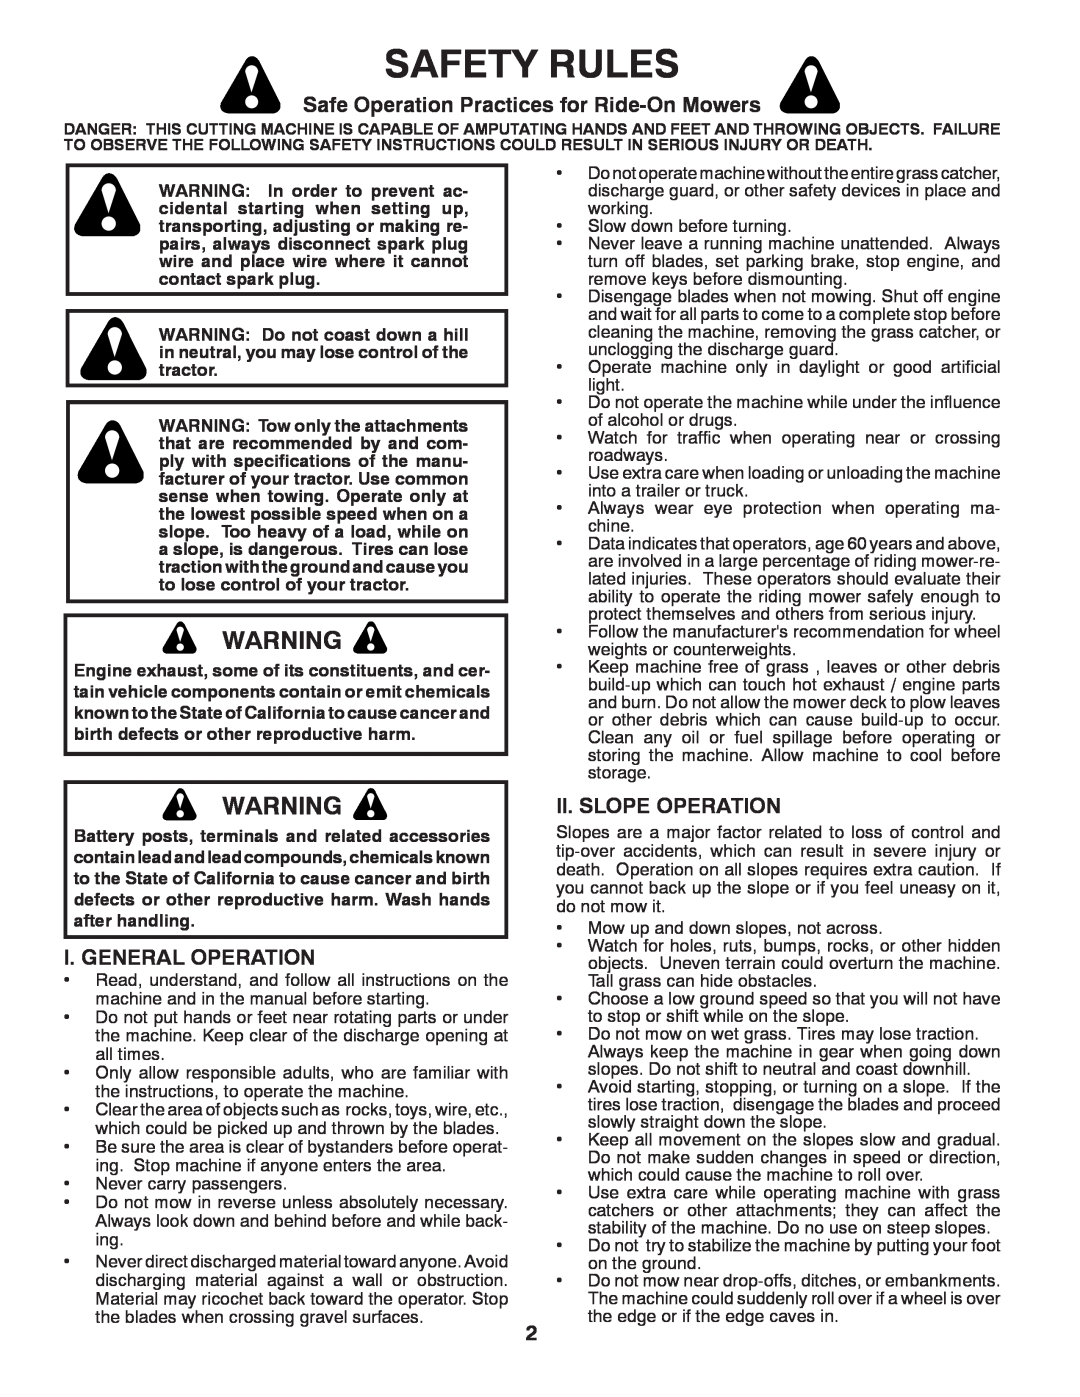 Husqvarna 96043005200 Safety Rules, Safe Operation Practices for Ride-On Mowers, I. General Operation, Ii. Slope Operation 